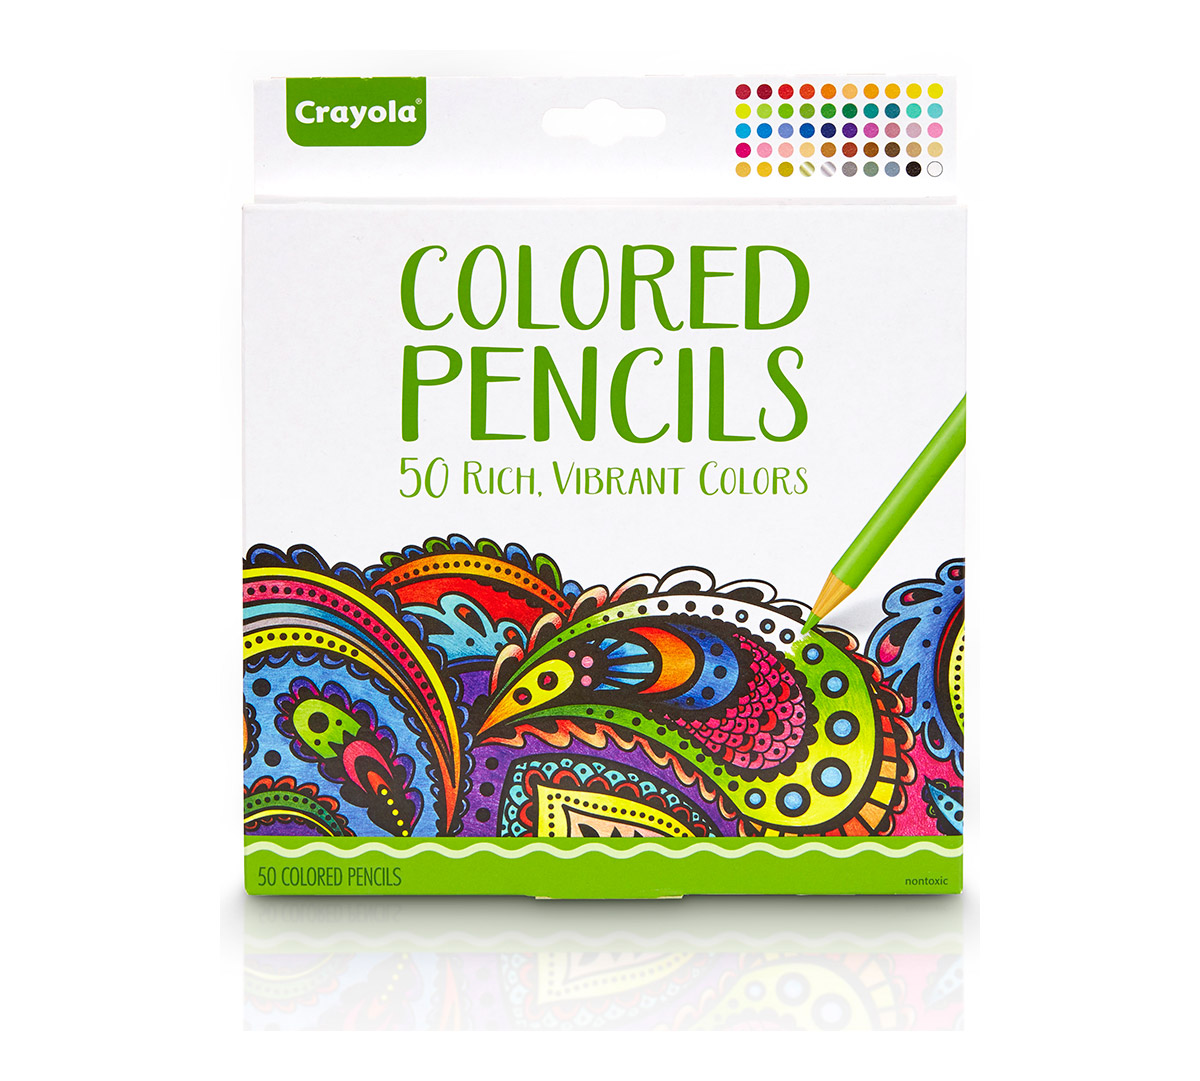 https://shop.crayola.com/on/demandware.static/-/Sites-crayola-storefront/default/dwb101f65a/images/68-0050-0-201_Aged-Up-Coloring_Colored-Pencils_50ct_PDP-1_F1.jpg